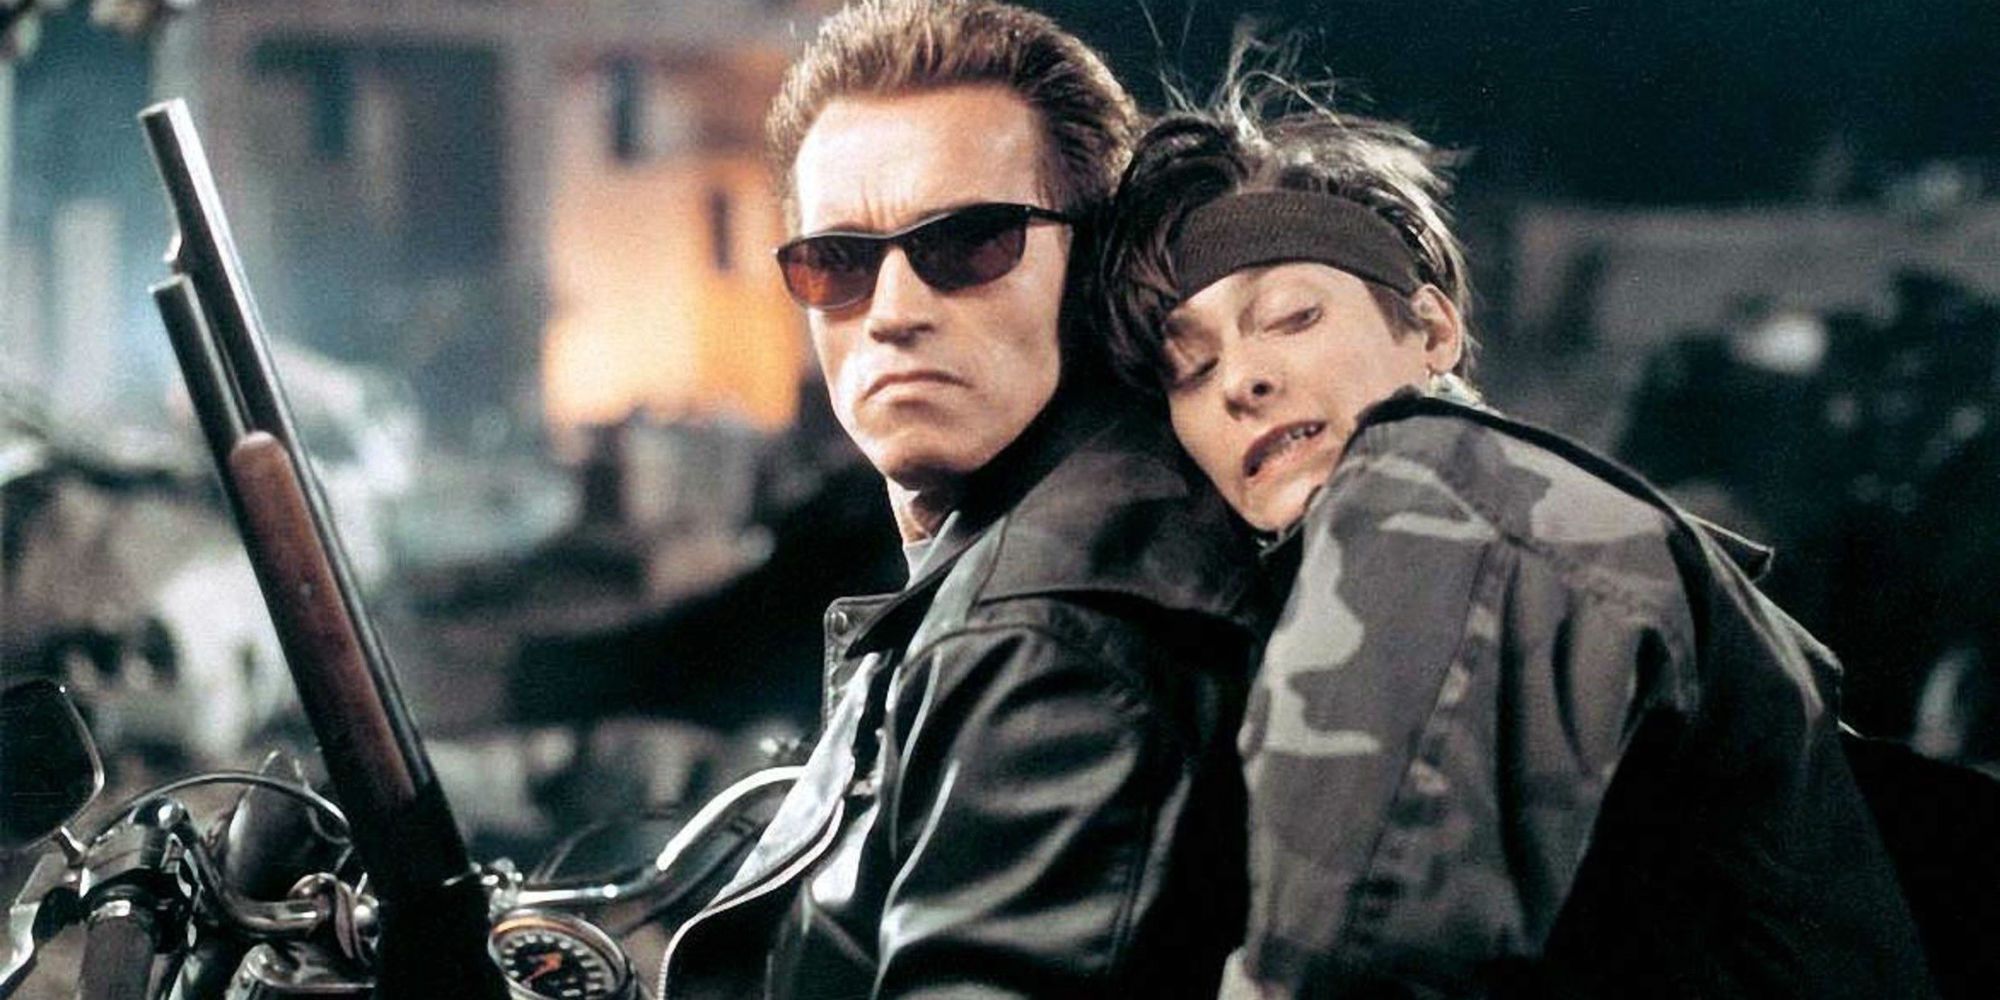 Terminator 2 3D Battle Across Time - The T-800 and John Connor